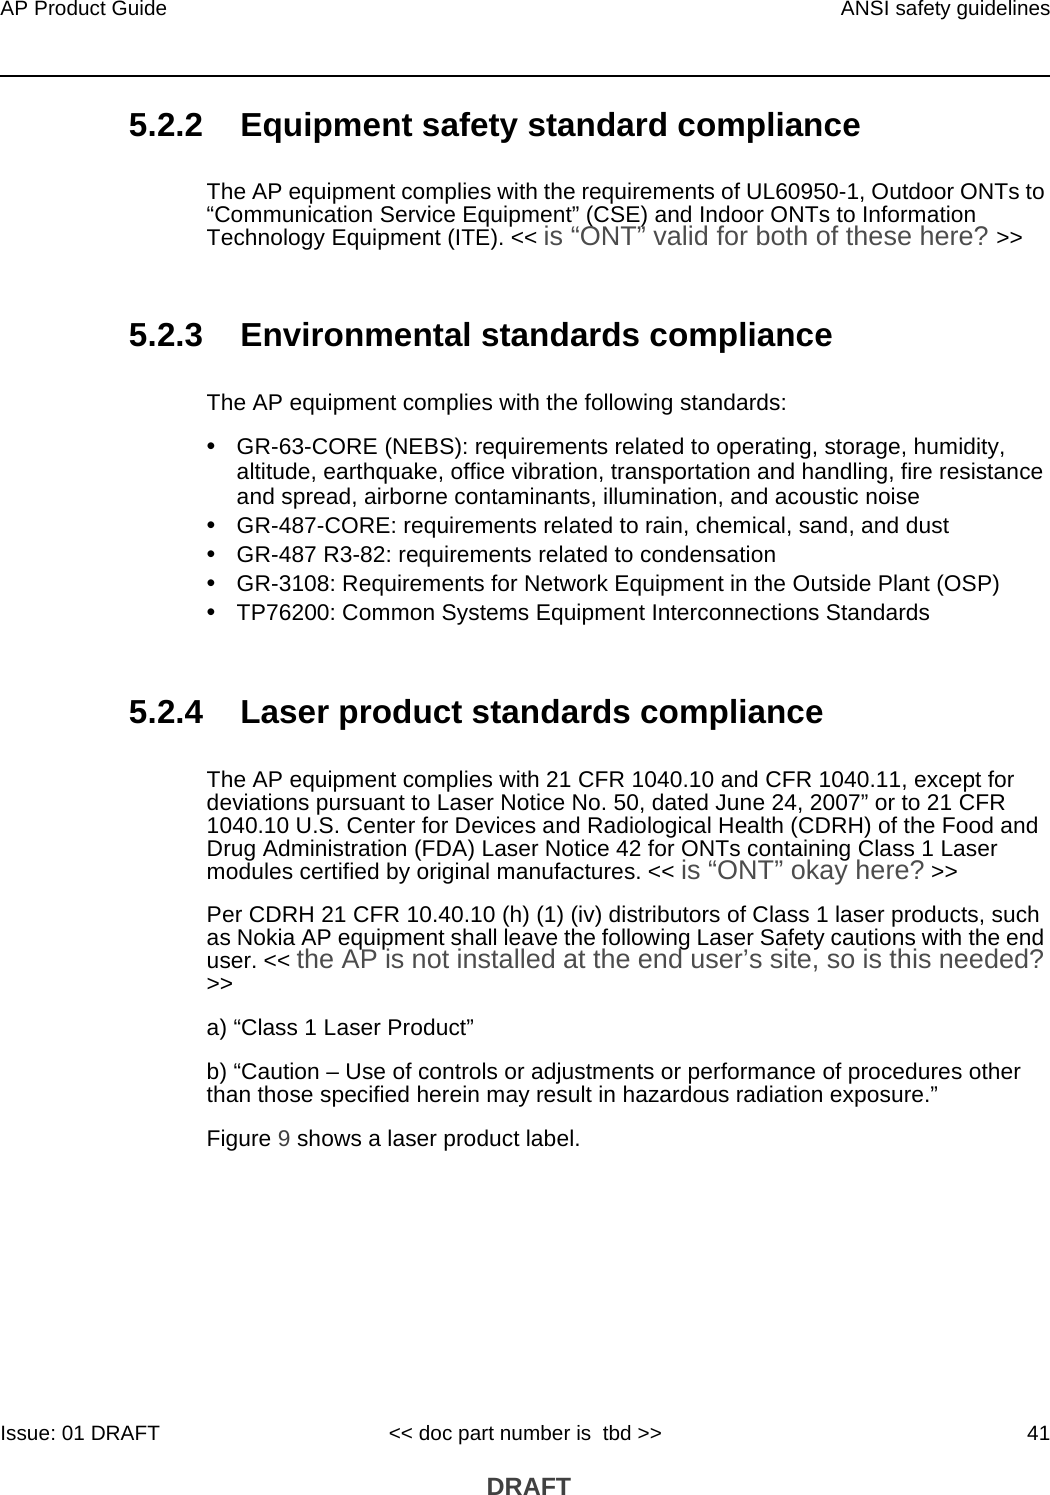 AP Product Guide ANSI safety guidelinesIssue: 01 DRAFT &lt;&lt; doc part number is  tbd &gt;&gt; 41 DRAFT5.2.2 Equipment safety standard complianceThe AP equipment complies with the requirements of UL60950-1, Outdoor ONTs to “Communication Service Equipment” (CSE) and Indoor ONTs to Information Technology Equipment (ITE). &lt;&lt; is “ONT” valid for both of these here? &gt;&gt;5.2.3 Environmental standards complianceThe AP equipment complies with the following standards:•GR-63-CORE (NEBS): requirements related to operating, storage, humidity, altitude, earthquake, office vibration, transportation and handling, fire resistance and spread, airborne contaminants, illumination, and acoustic noise•GR-487-CORE: requirements related to rain, chemical, sand, and dust•GR-487 R3-82: requirements related to condensation •GR-3108: Requirements for Network Equipment in the Outside Plant (OSP)•TP76200: Common Systems Equipment Interconnections Standards5.2.4 Laser product standards complianceThe AP equipment complies with 21 CFR 1040.10 and CFR 1040.11, except for deviations pursuant to Laser Notice No. 50, dated June 24, 2007” or to 21 CFR 1040.10 U.S. Center for Devices and Radiological Health (CDRH) of the Food and Drug Administration (FDA) Laser Notice 42 for ONTs containing Class 1 Laser modules certified by original manufactures. &lt;&lt; is “ONT” okay here? &gt;&gt;Per CDRH 21 CFR 10.40.10 (h) (1) (iv) distributors of Class 1 laser products, such as Nokia AP equipment shall leave the following Laser Safety cautions with the end user. &lt;&lt; the AP is not installed at the end user’s site, so is this needed? &gt;&gt;a) “Class 1 Laser Product”b) “Caution – Use of controls or adjustments or performance of procedures other than those specified herein may result in hazardous radiation exposure.”Figure 9 shows a laser product label.